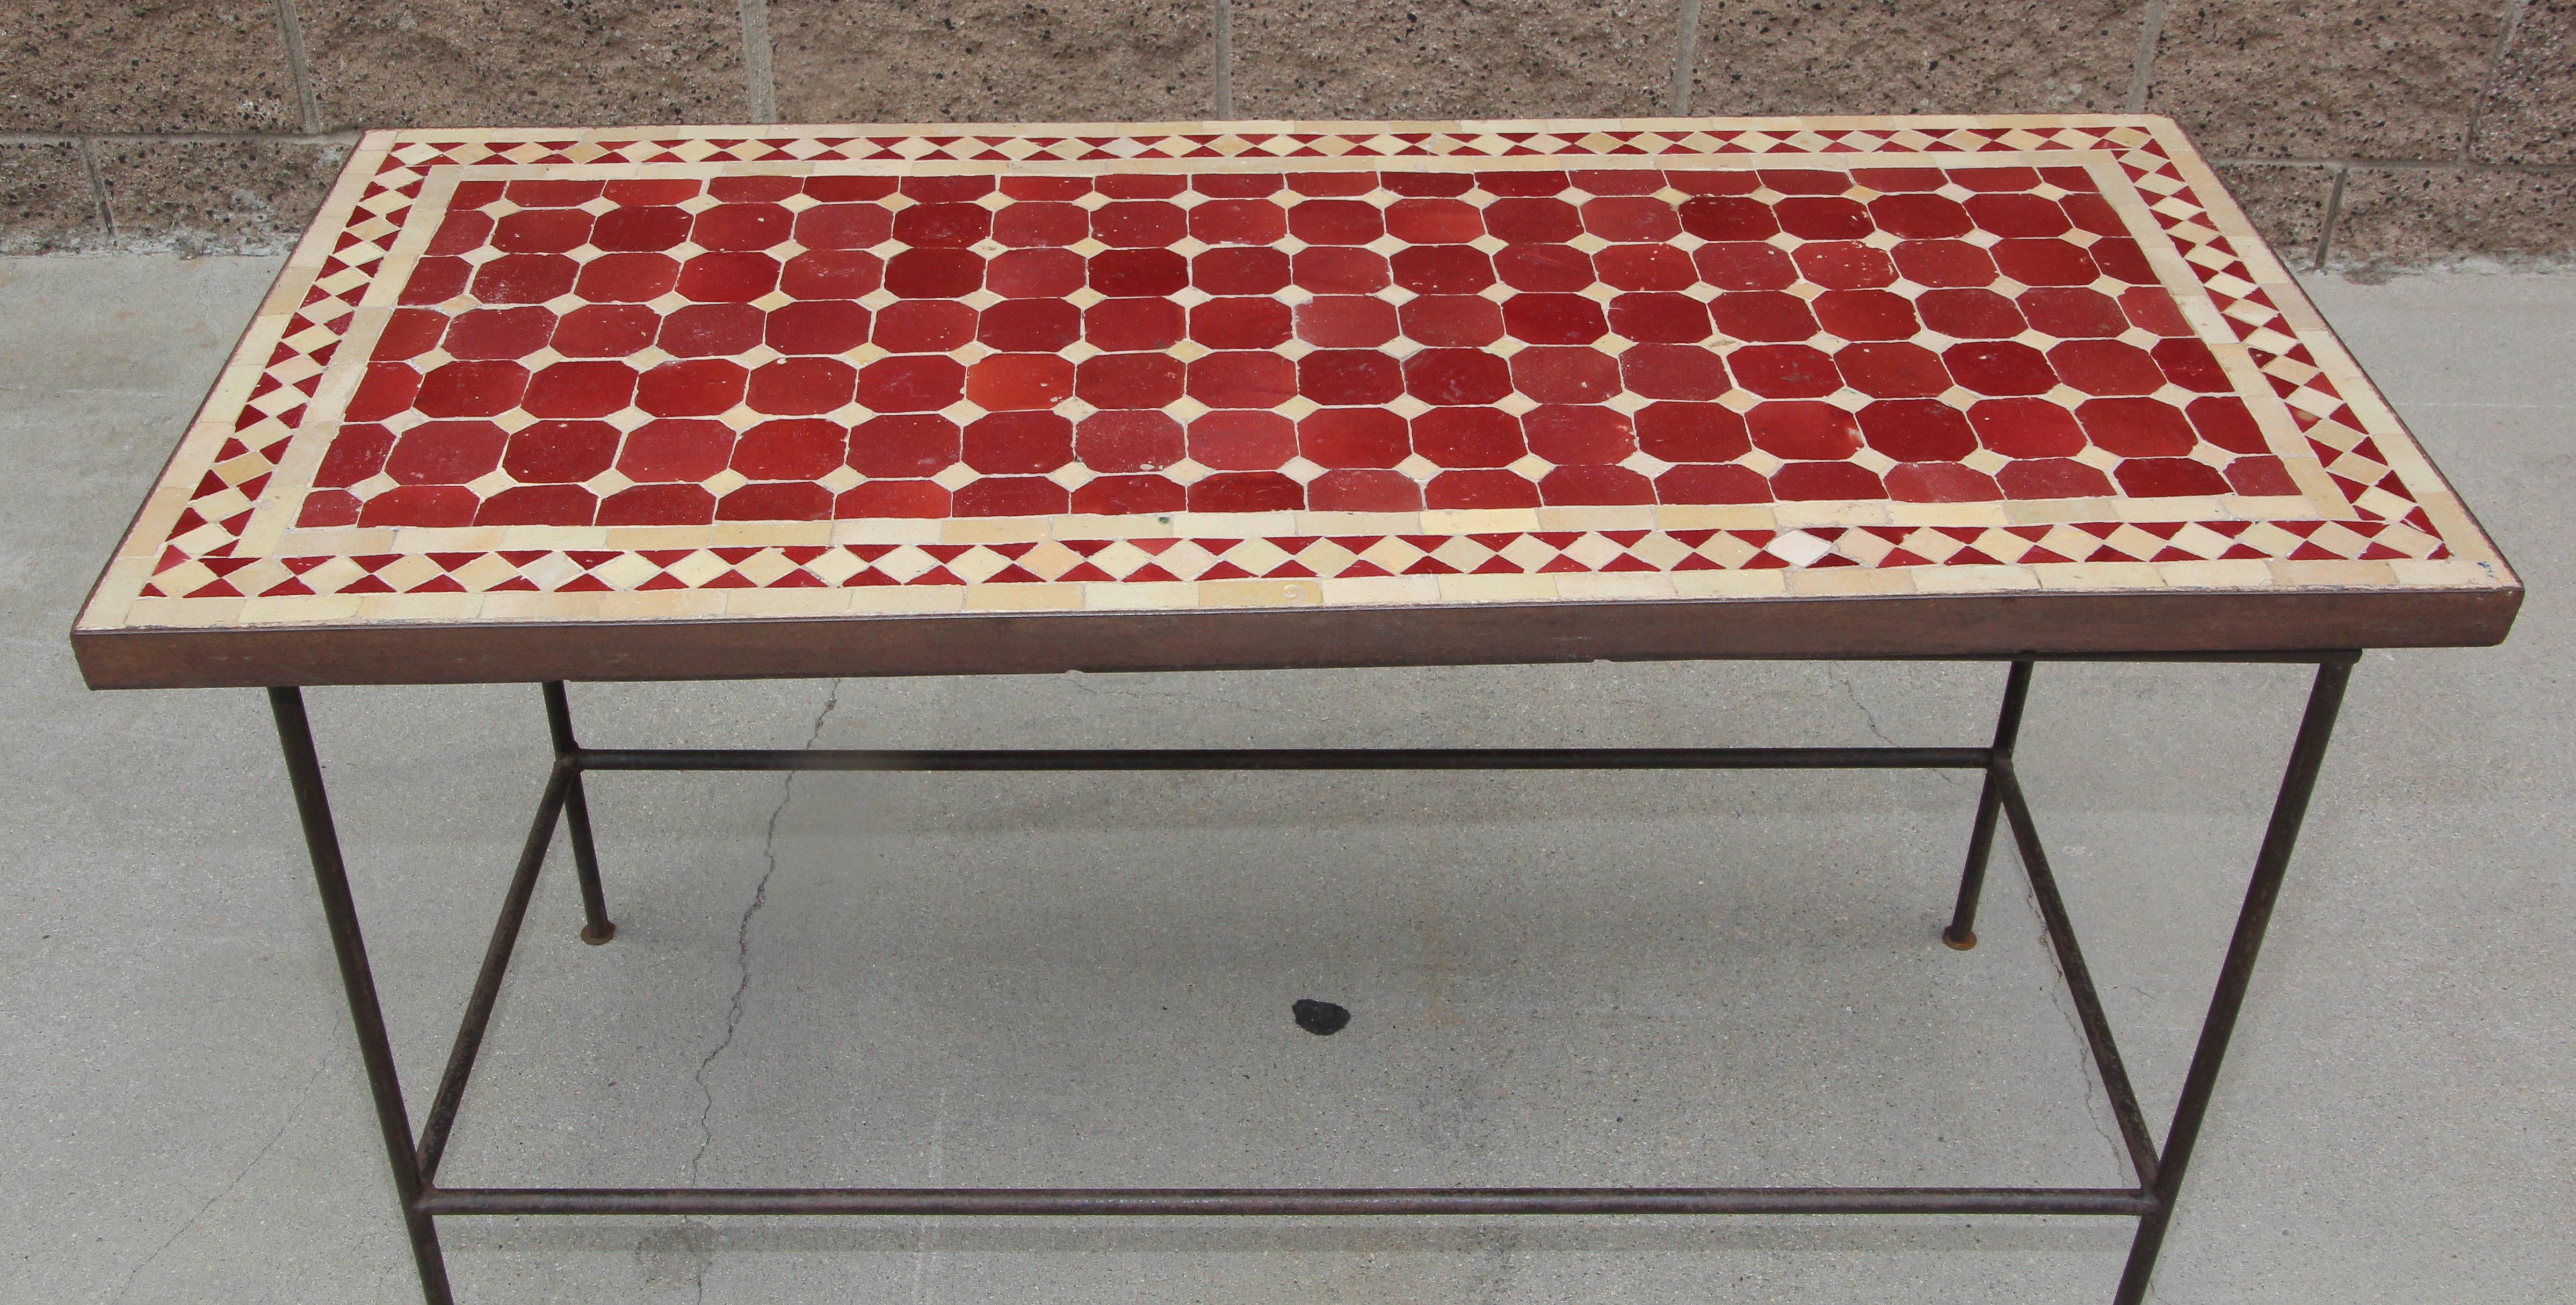 red moroccan tiles